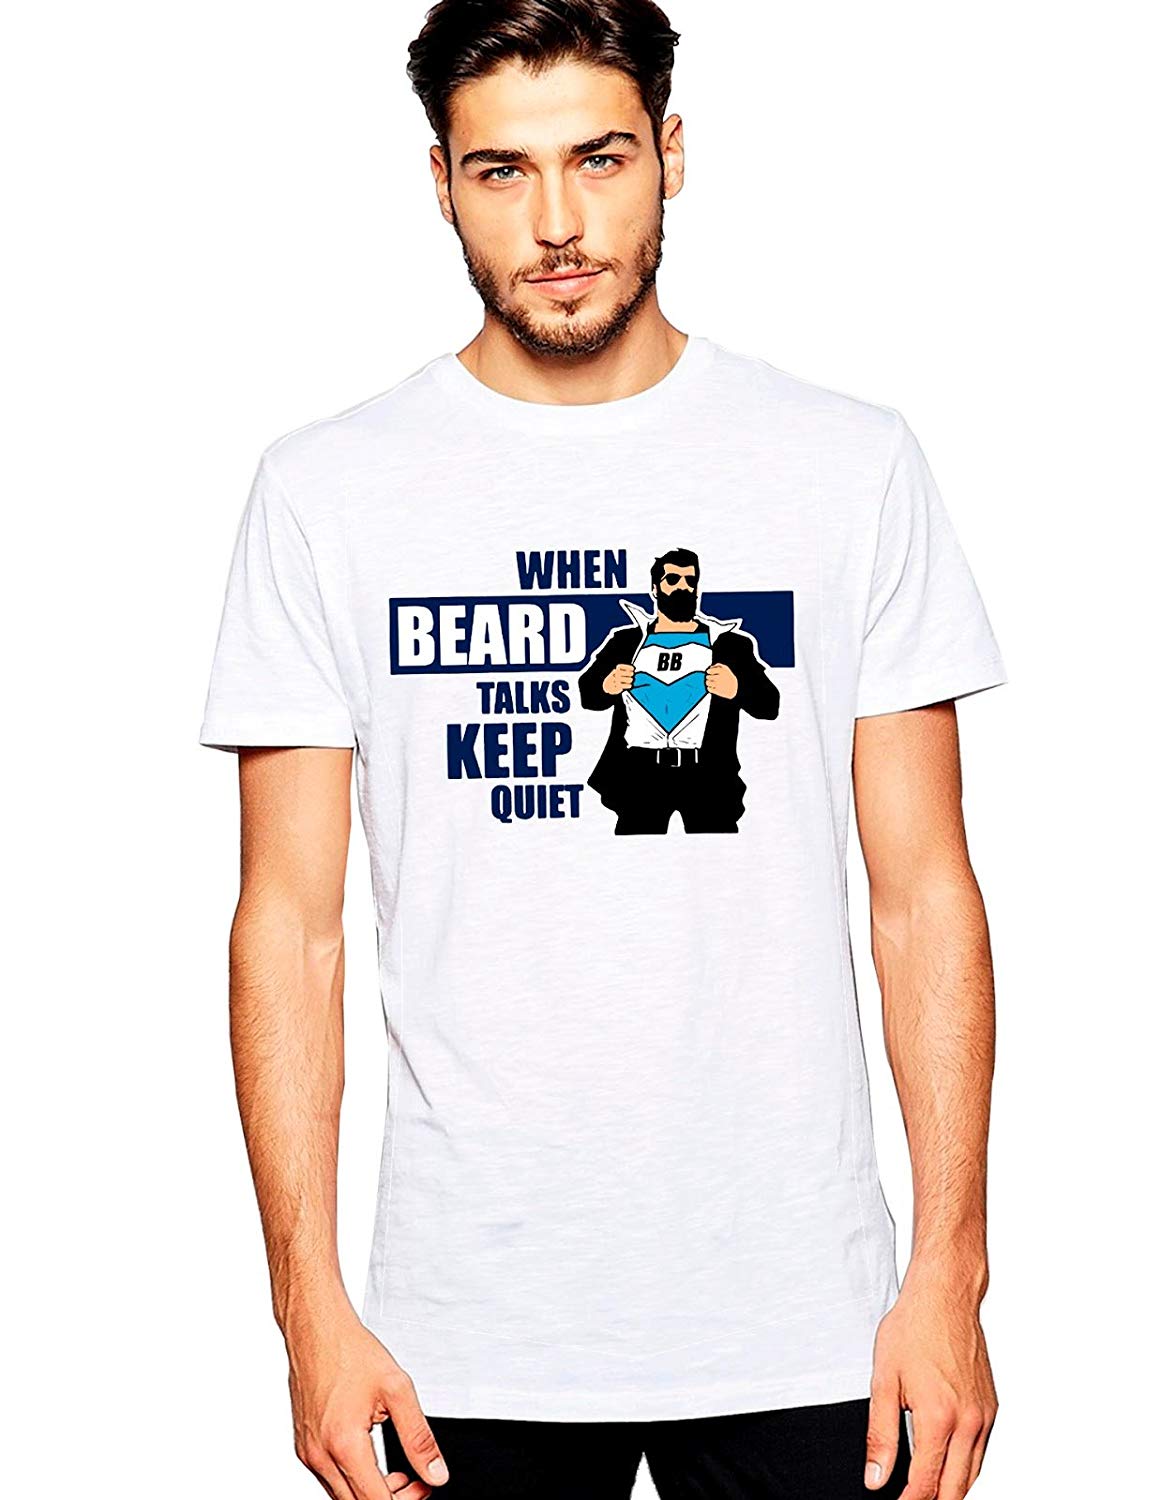 DOUBLE F ROUND NECK HALF SLEEVE WHITE COLOR WHEN BEARD TALKS KEEP QUITE PRINTED T-SHIRT FOR MEN